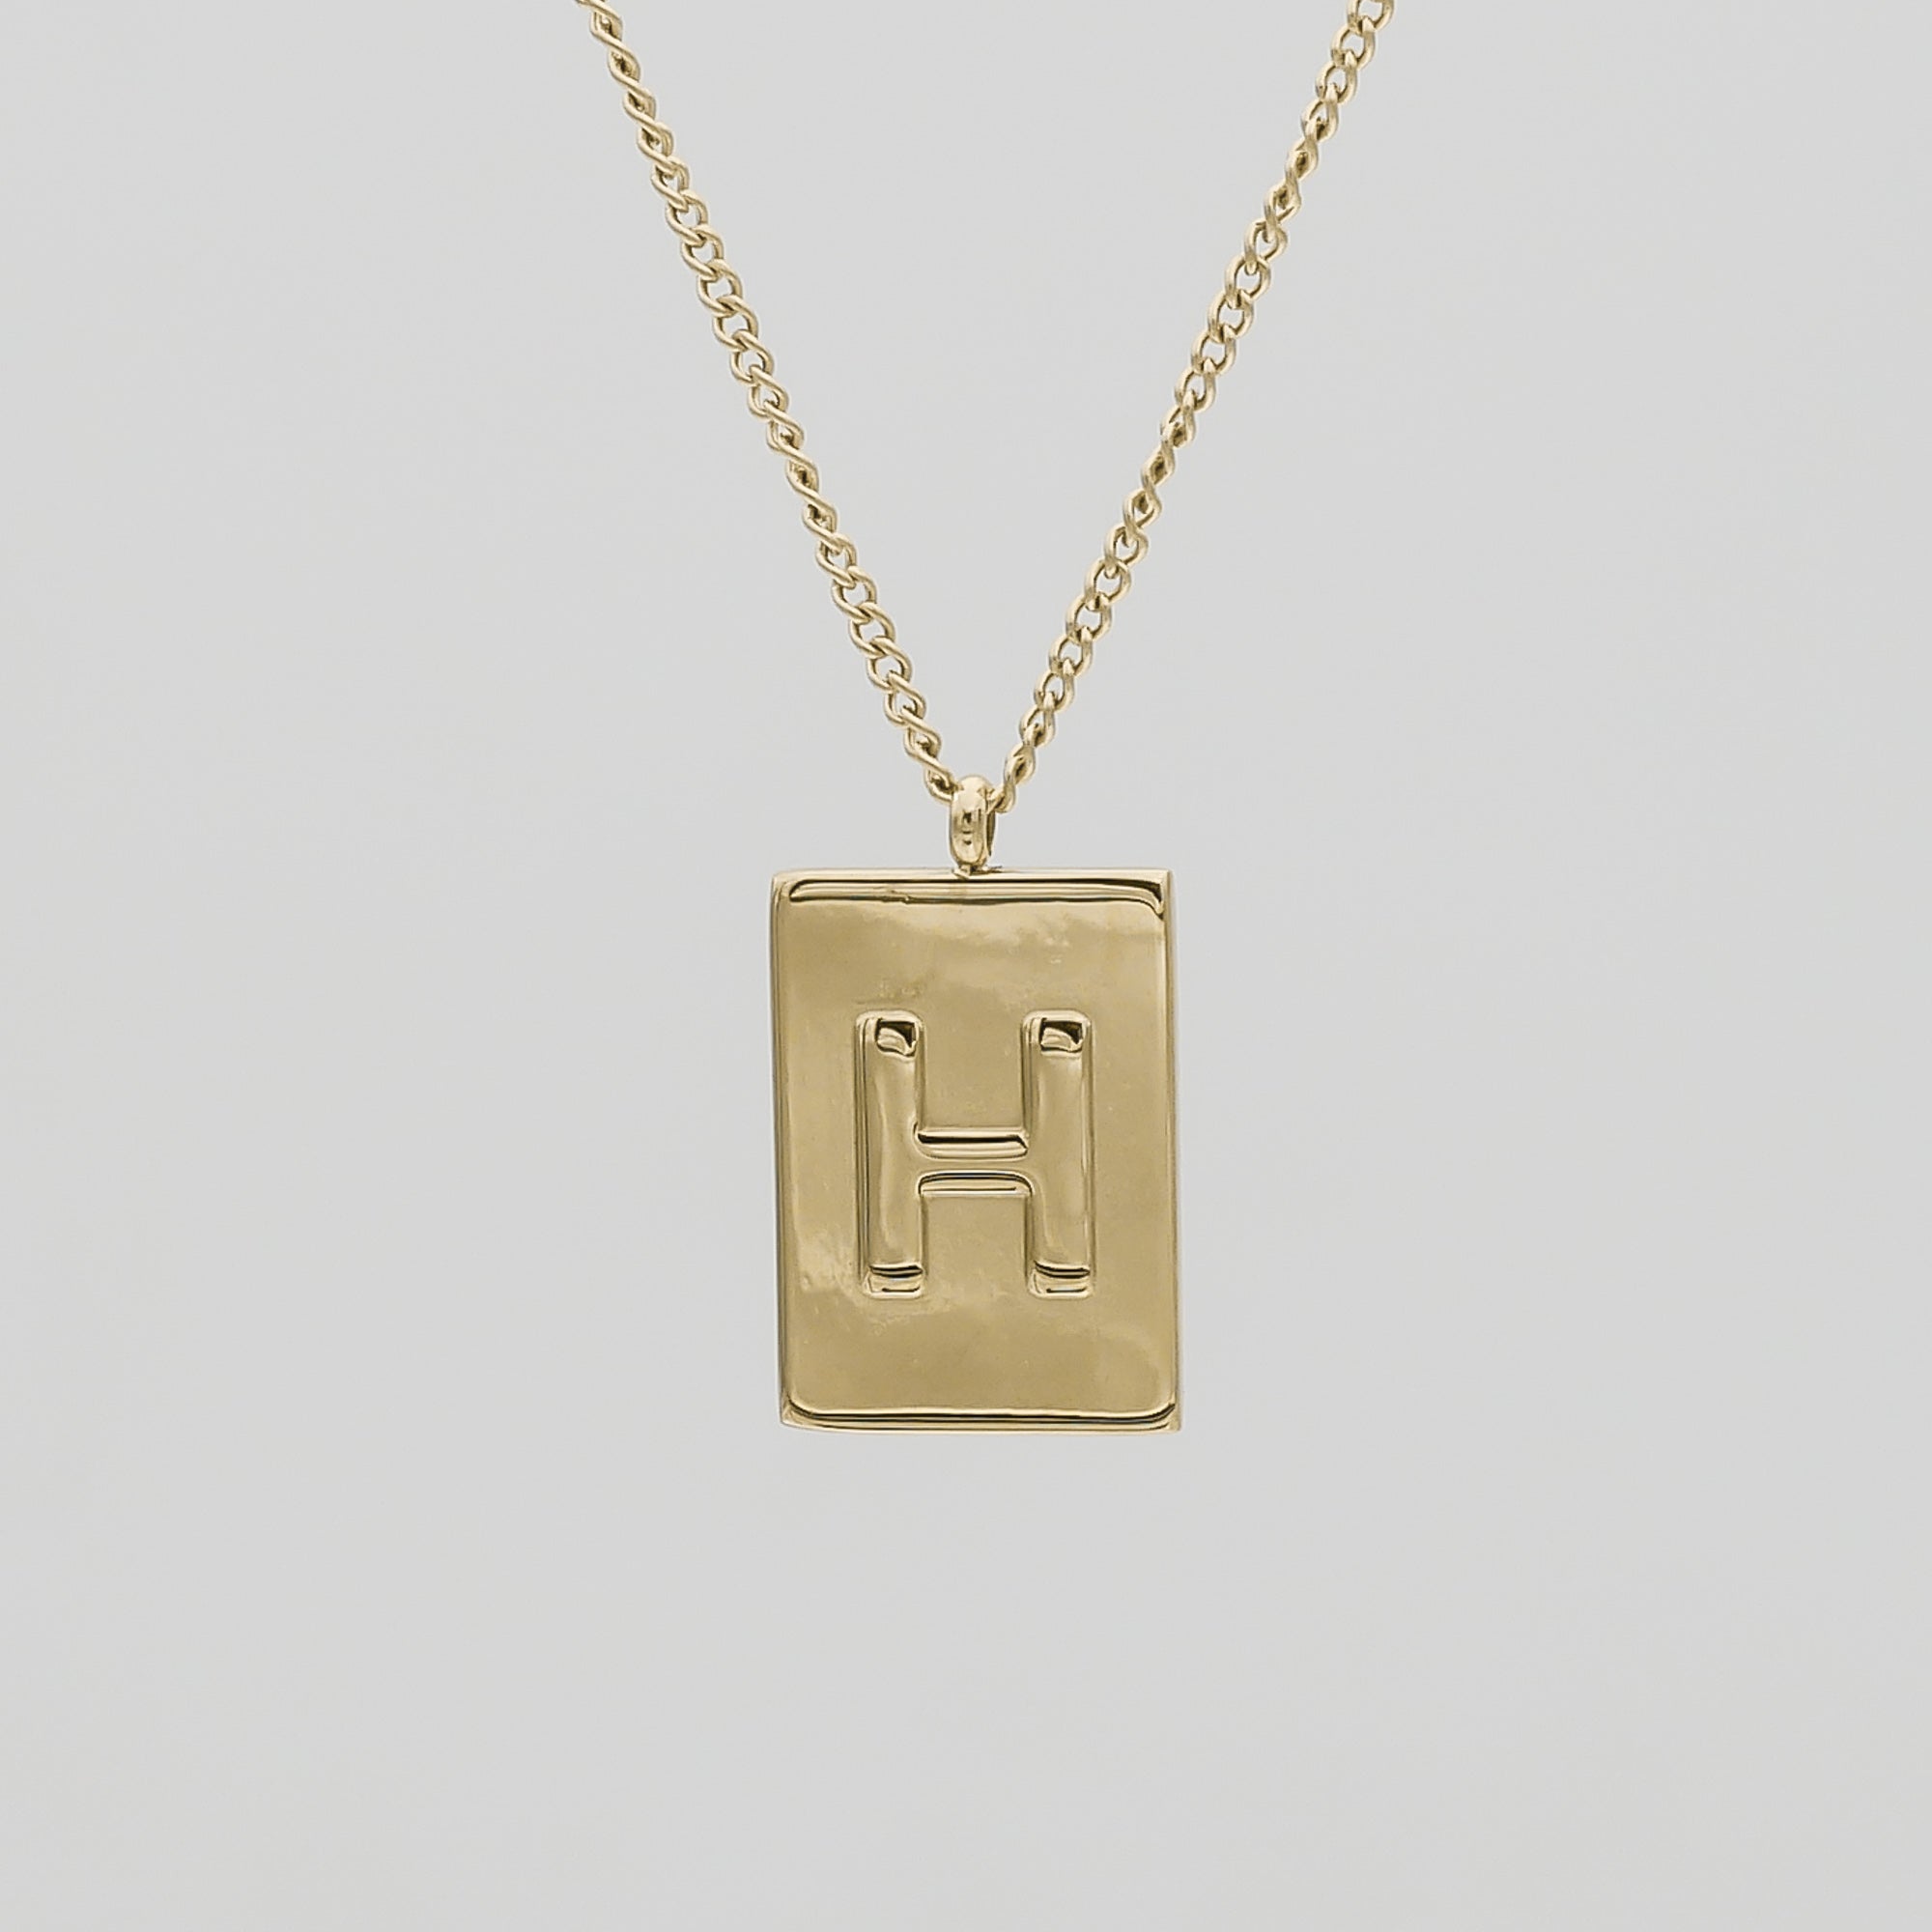 Athena custom initial Gold pendant Necklace, letter H by PRYA